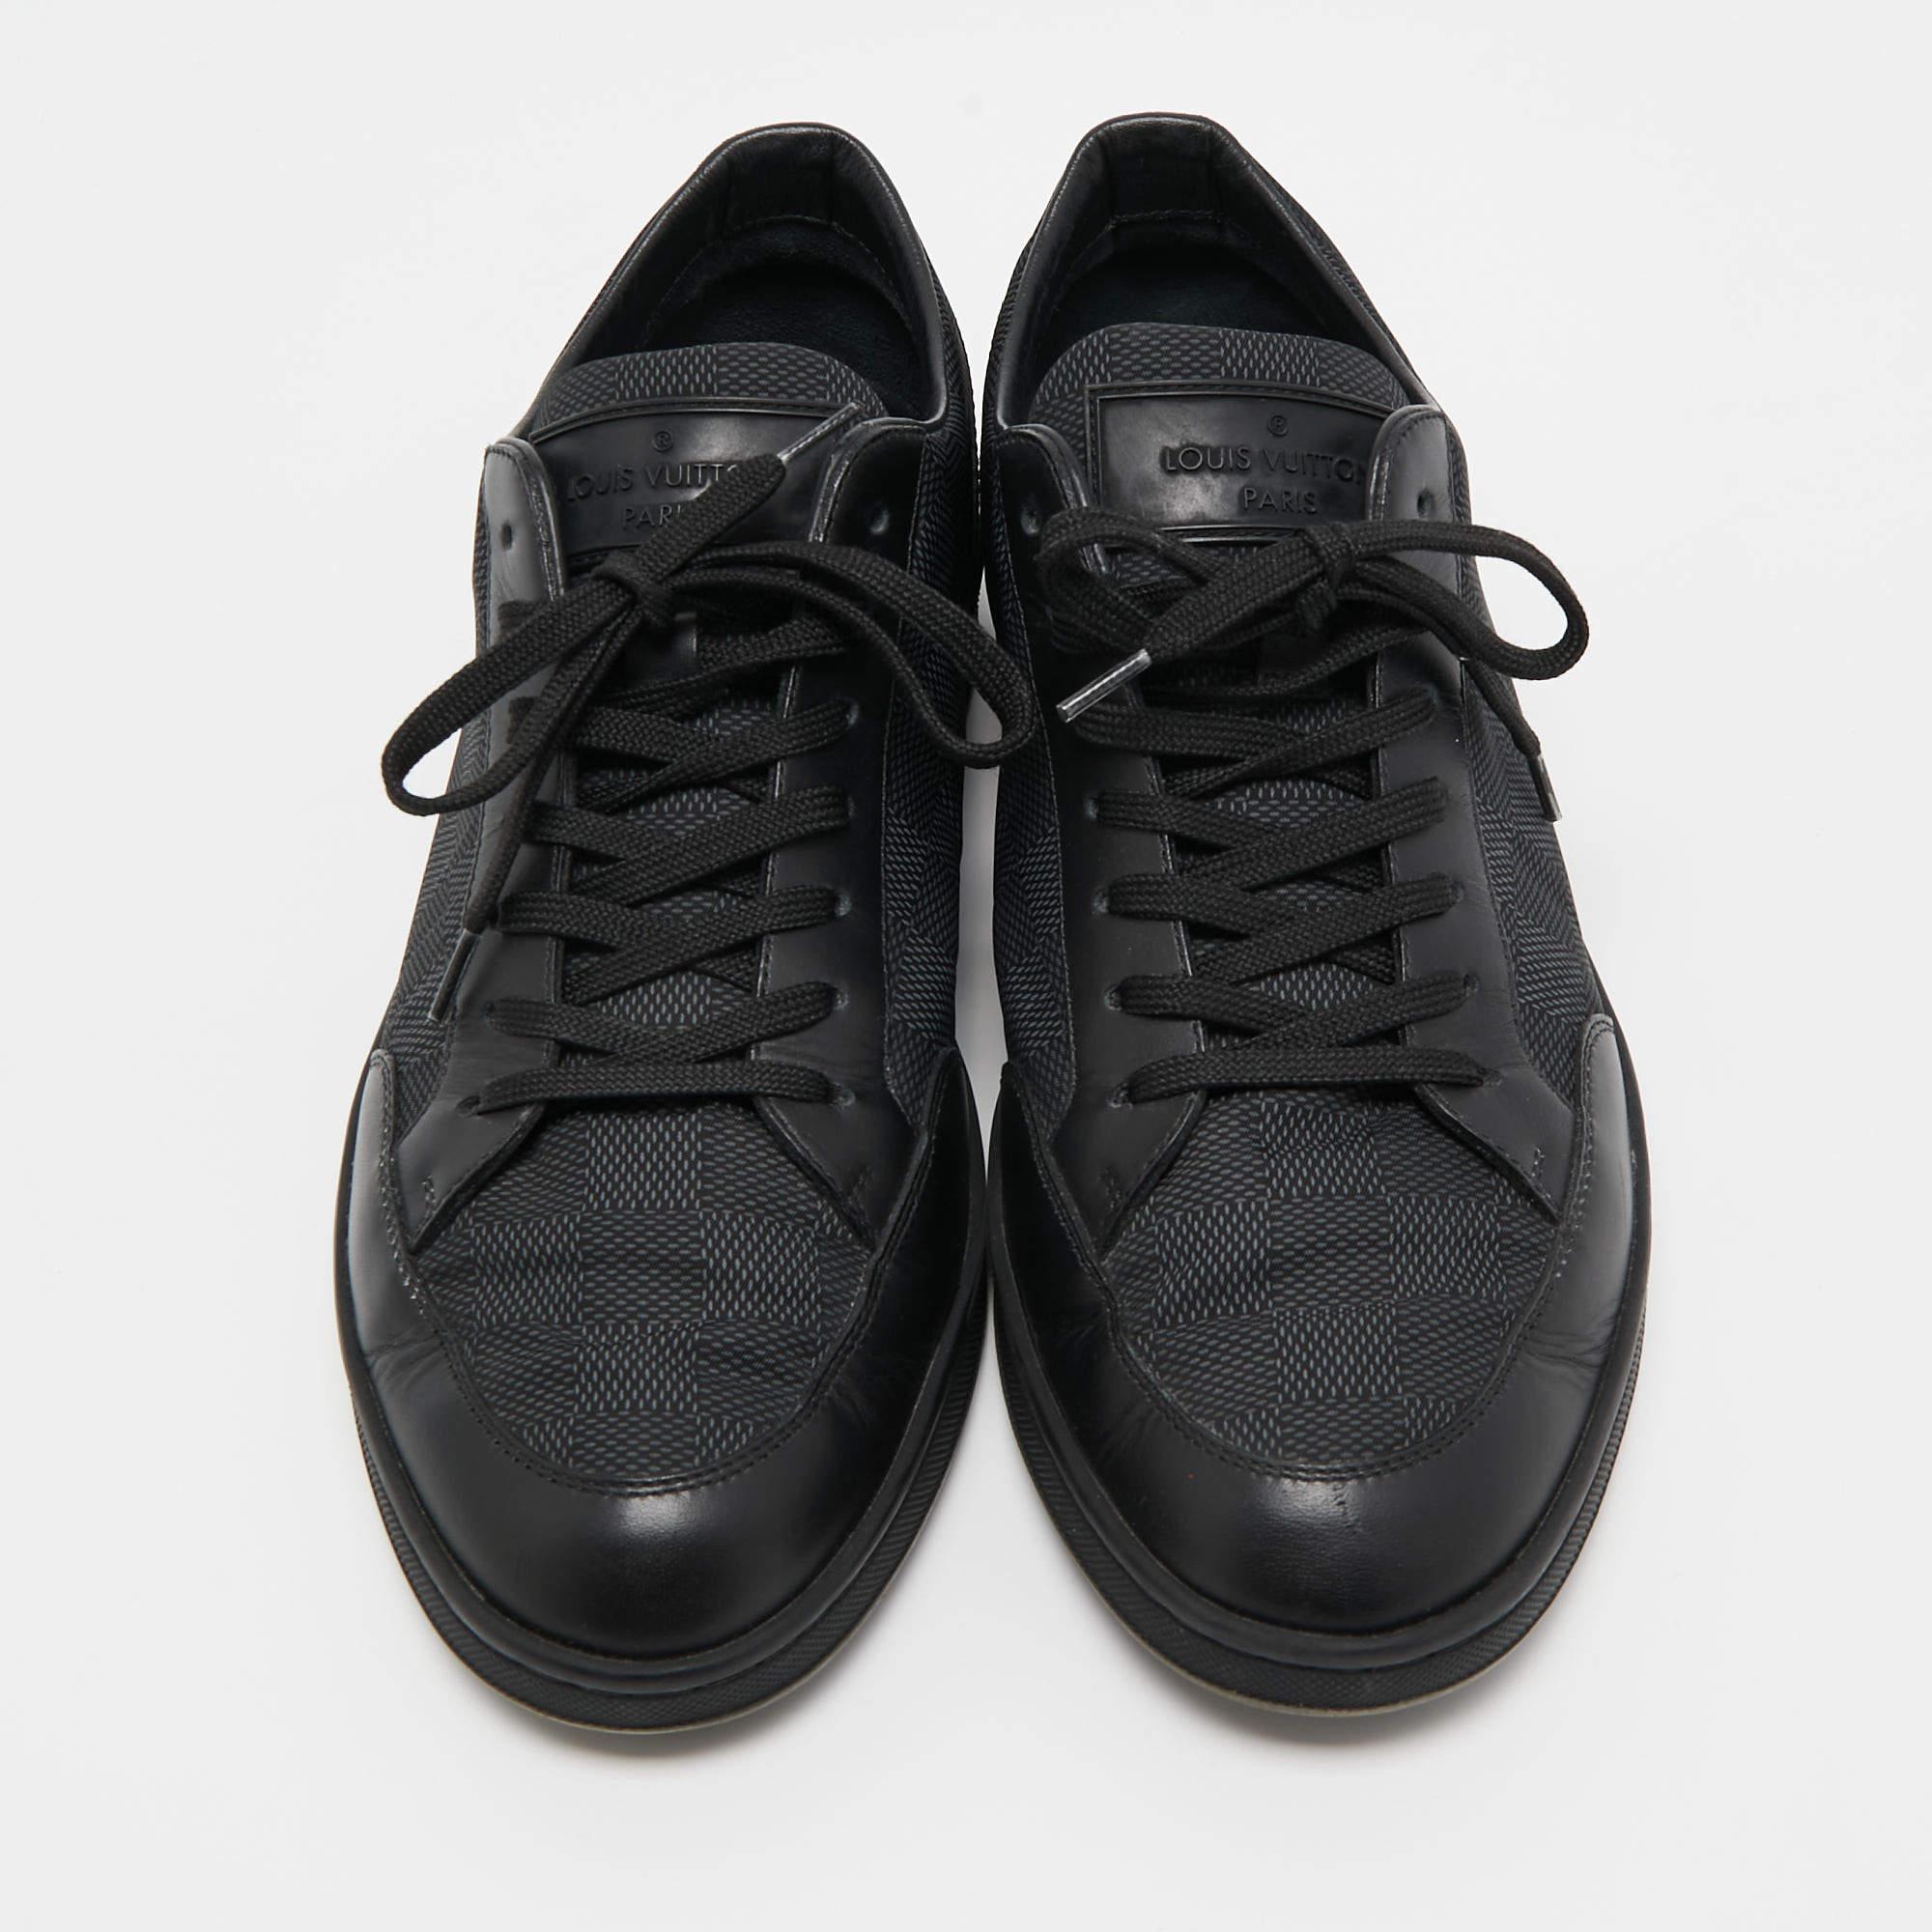 Louis Vuitton Black Leather and Nylon Low Top Sneakers Size 41 For Sale 3